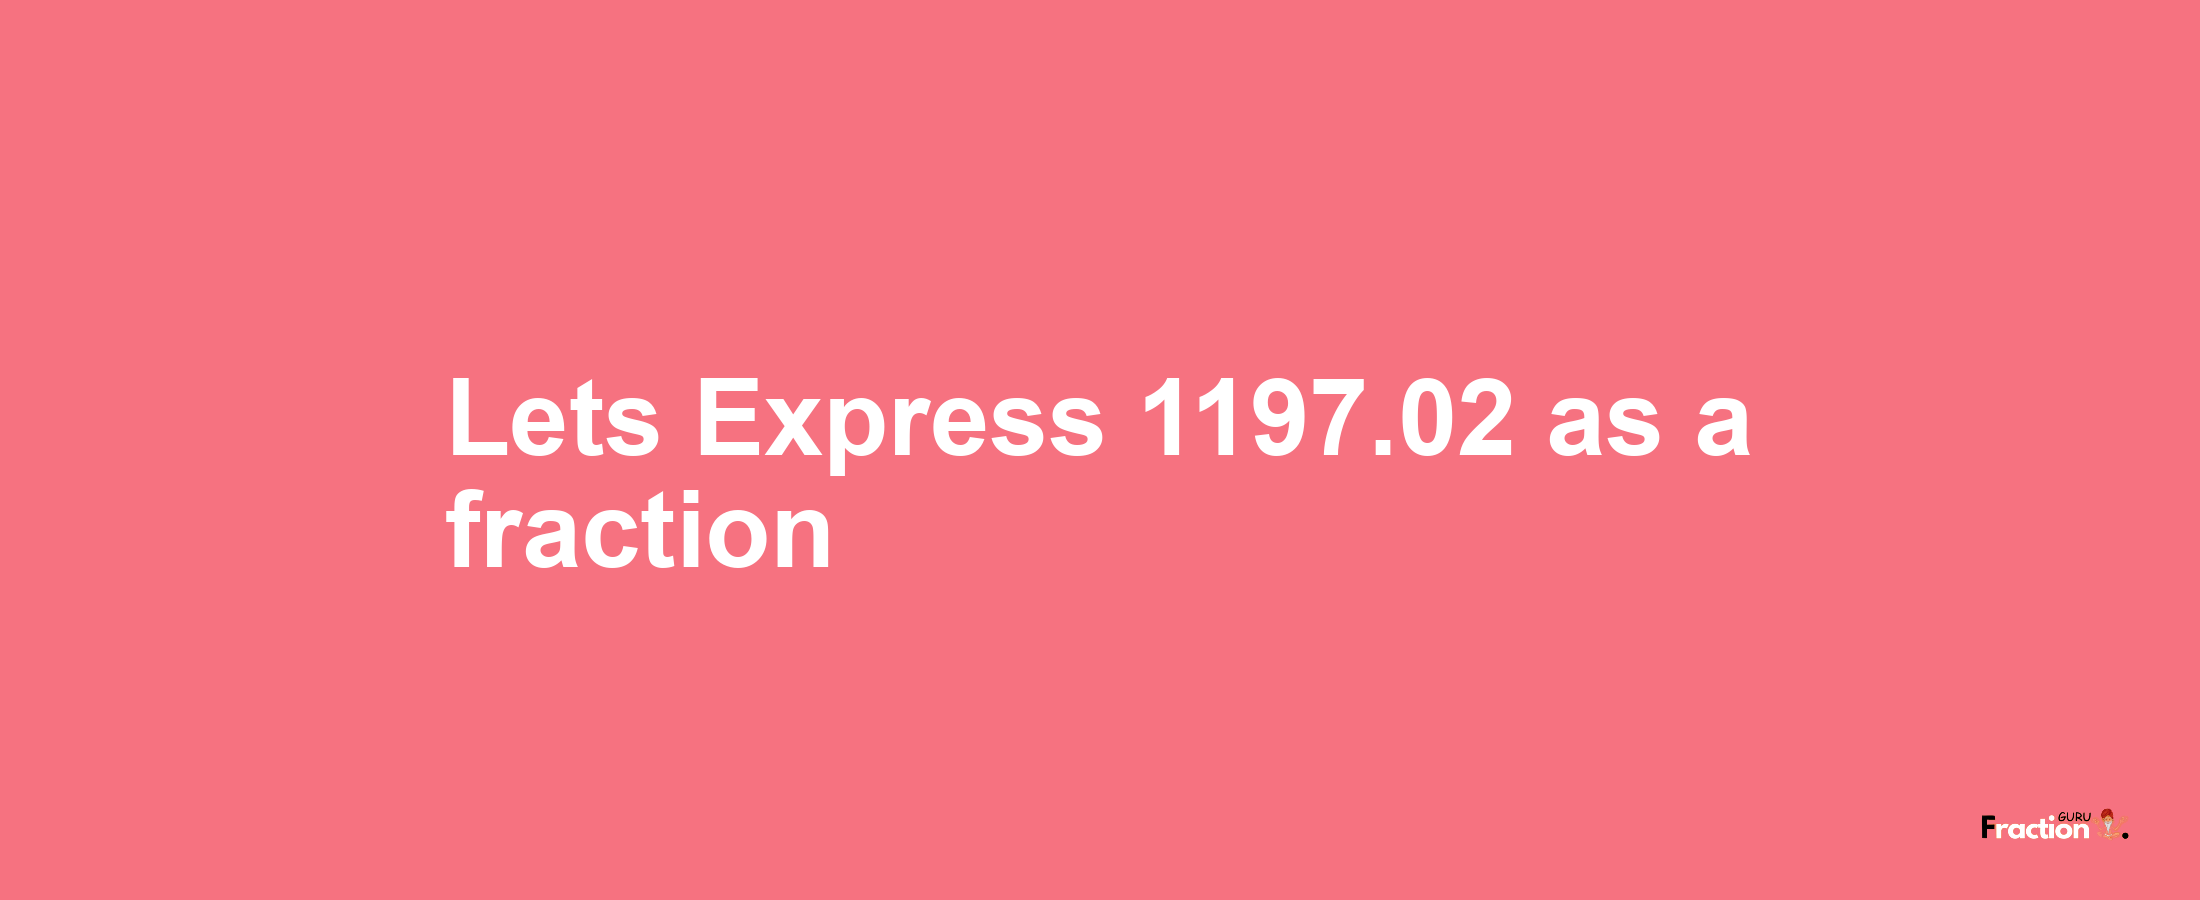 Lets Express 1197.02 as afraction